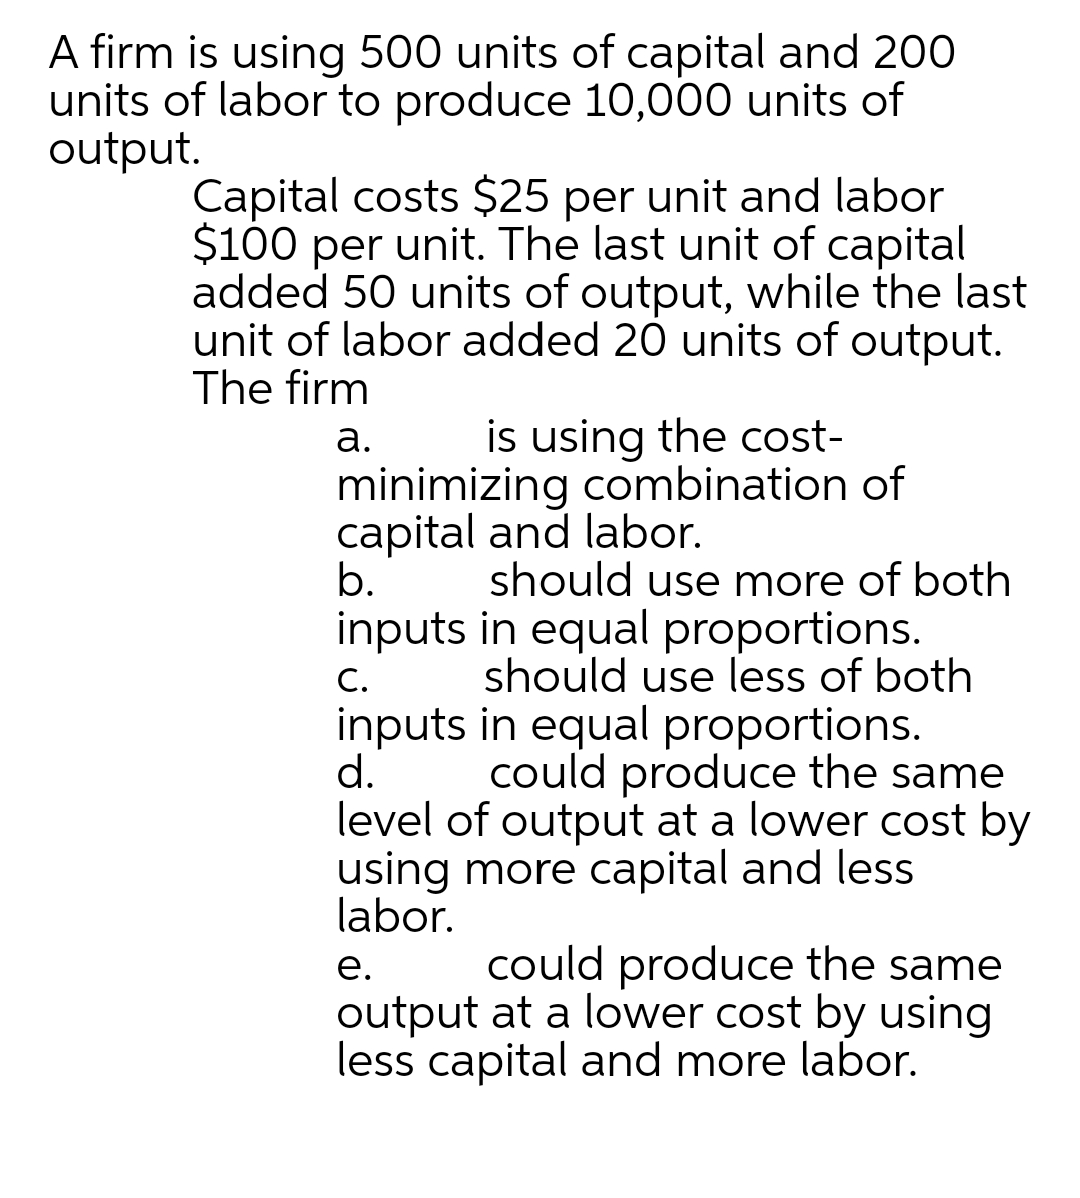 A firm is using 500 units of capital and 200
units of labor to produce 10,000 units of
output.
Capital costs $25 per unit and labor
$100 per unit. The last unit of capital
added 50 units of output, while the last
unit of labor added 20 units of output.
The firm
is using the cost-
а.
minimizing combination of
capital and labor.
b.
should use more of both
inputs in equal proportions.
С.
should use less of both
inputs in equal proportions.
d.
level of output at a lower cost by
using more capital and less
labor.
could produce the same
could produce the same
output at a lower cost by using
less capital and more labor.
е.
